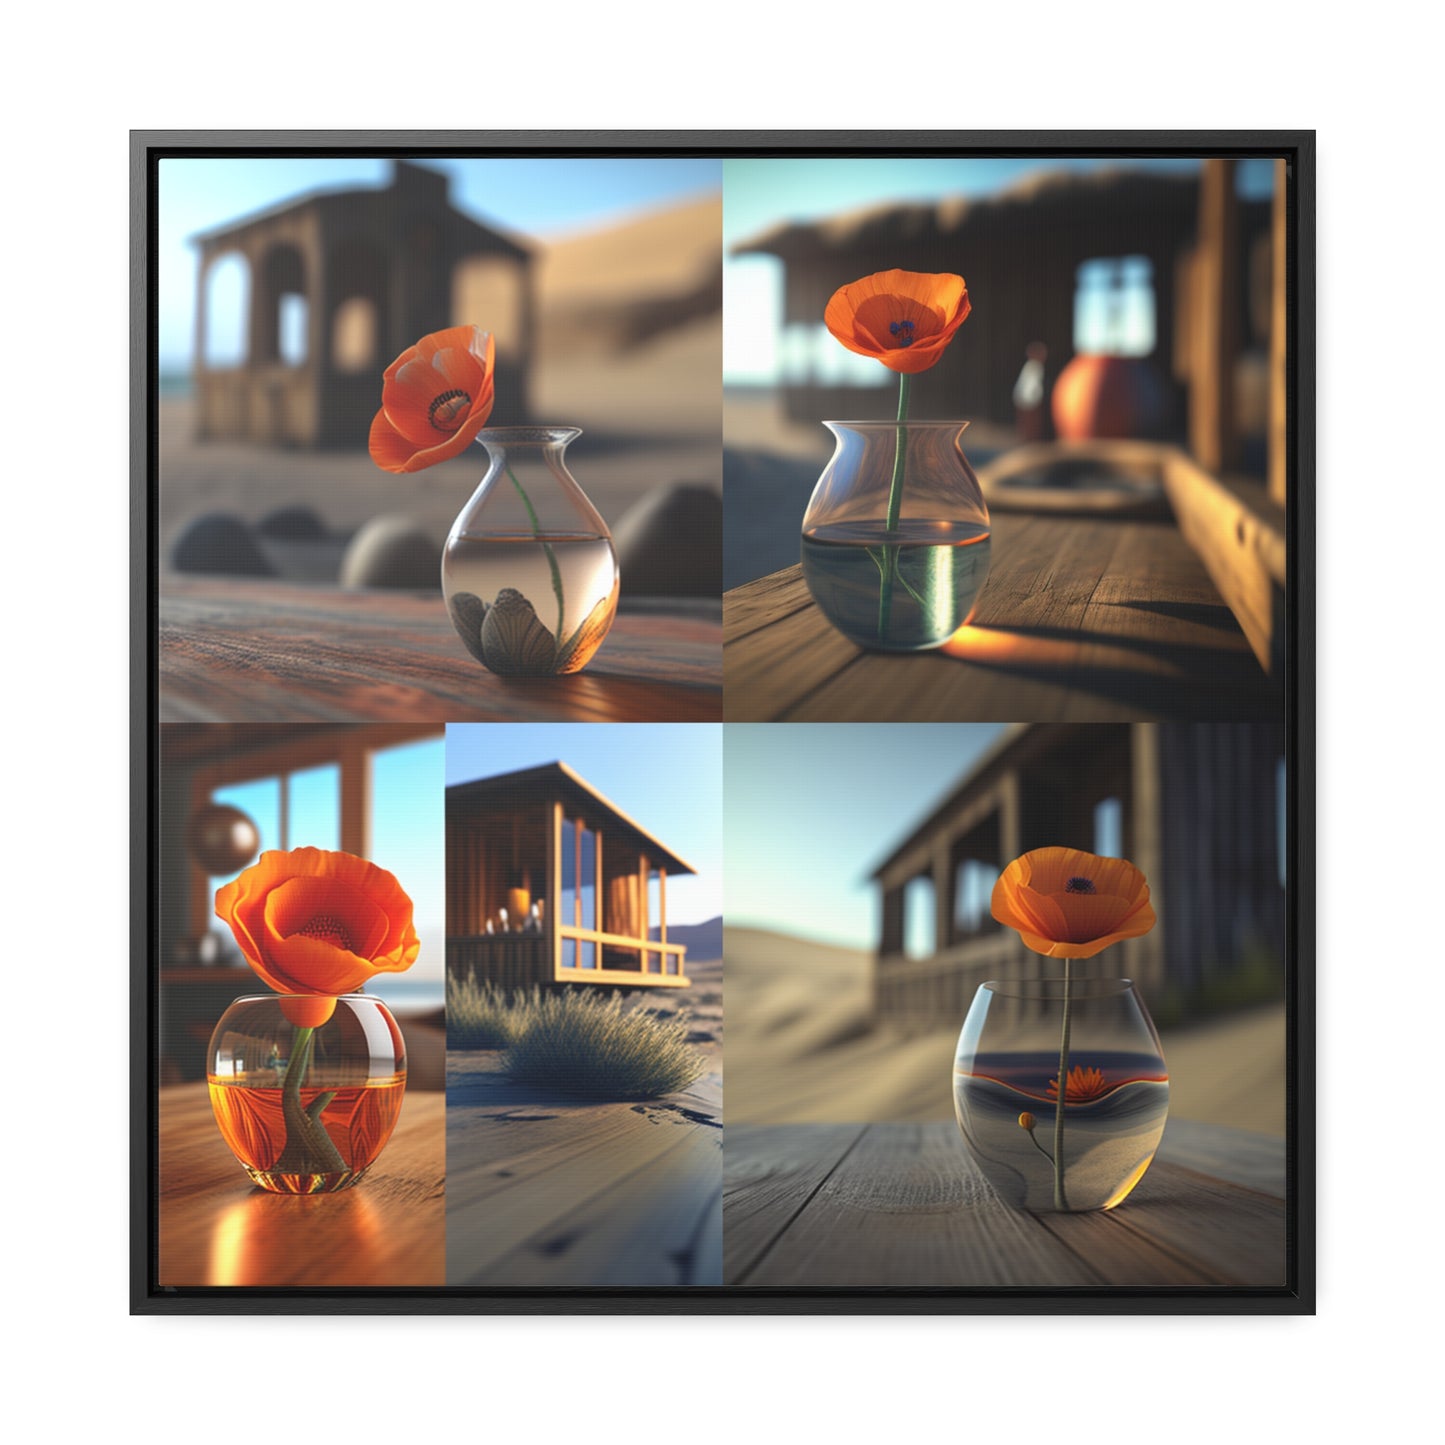 Gallery Canvas Wraps, Square Frame Poppy in a Glass Vase 5